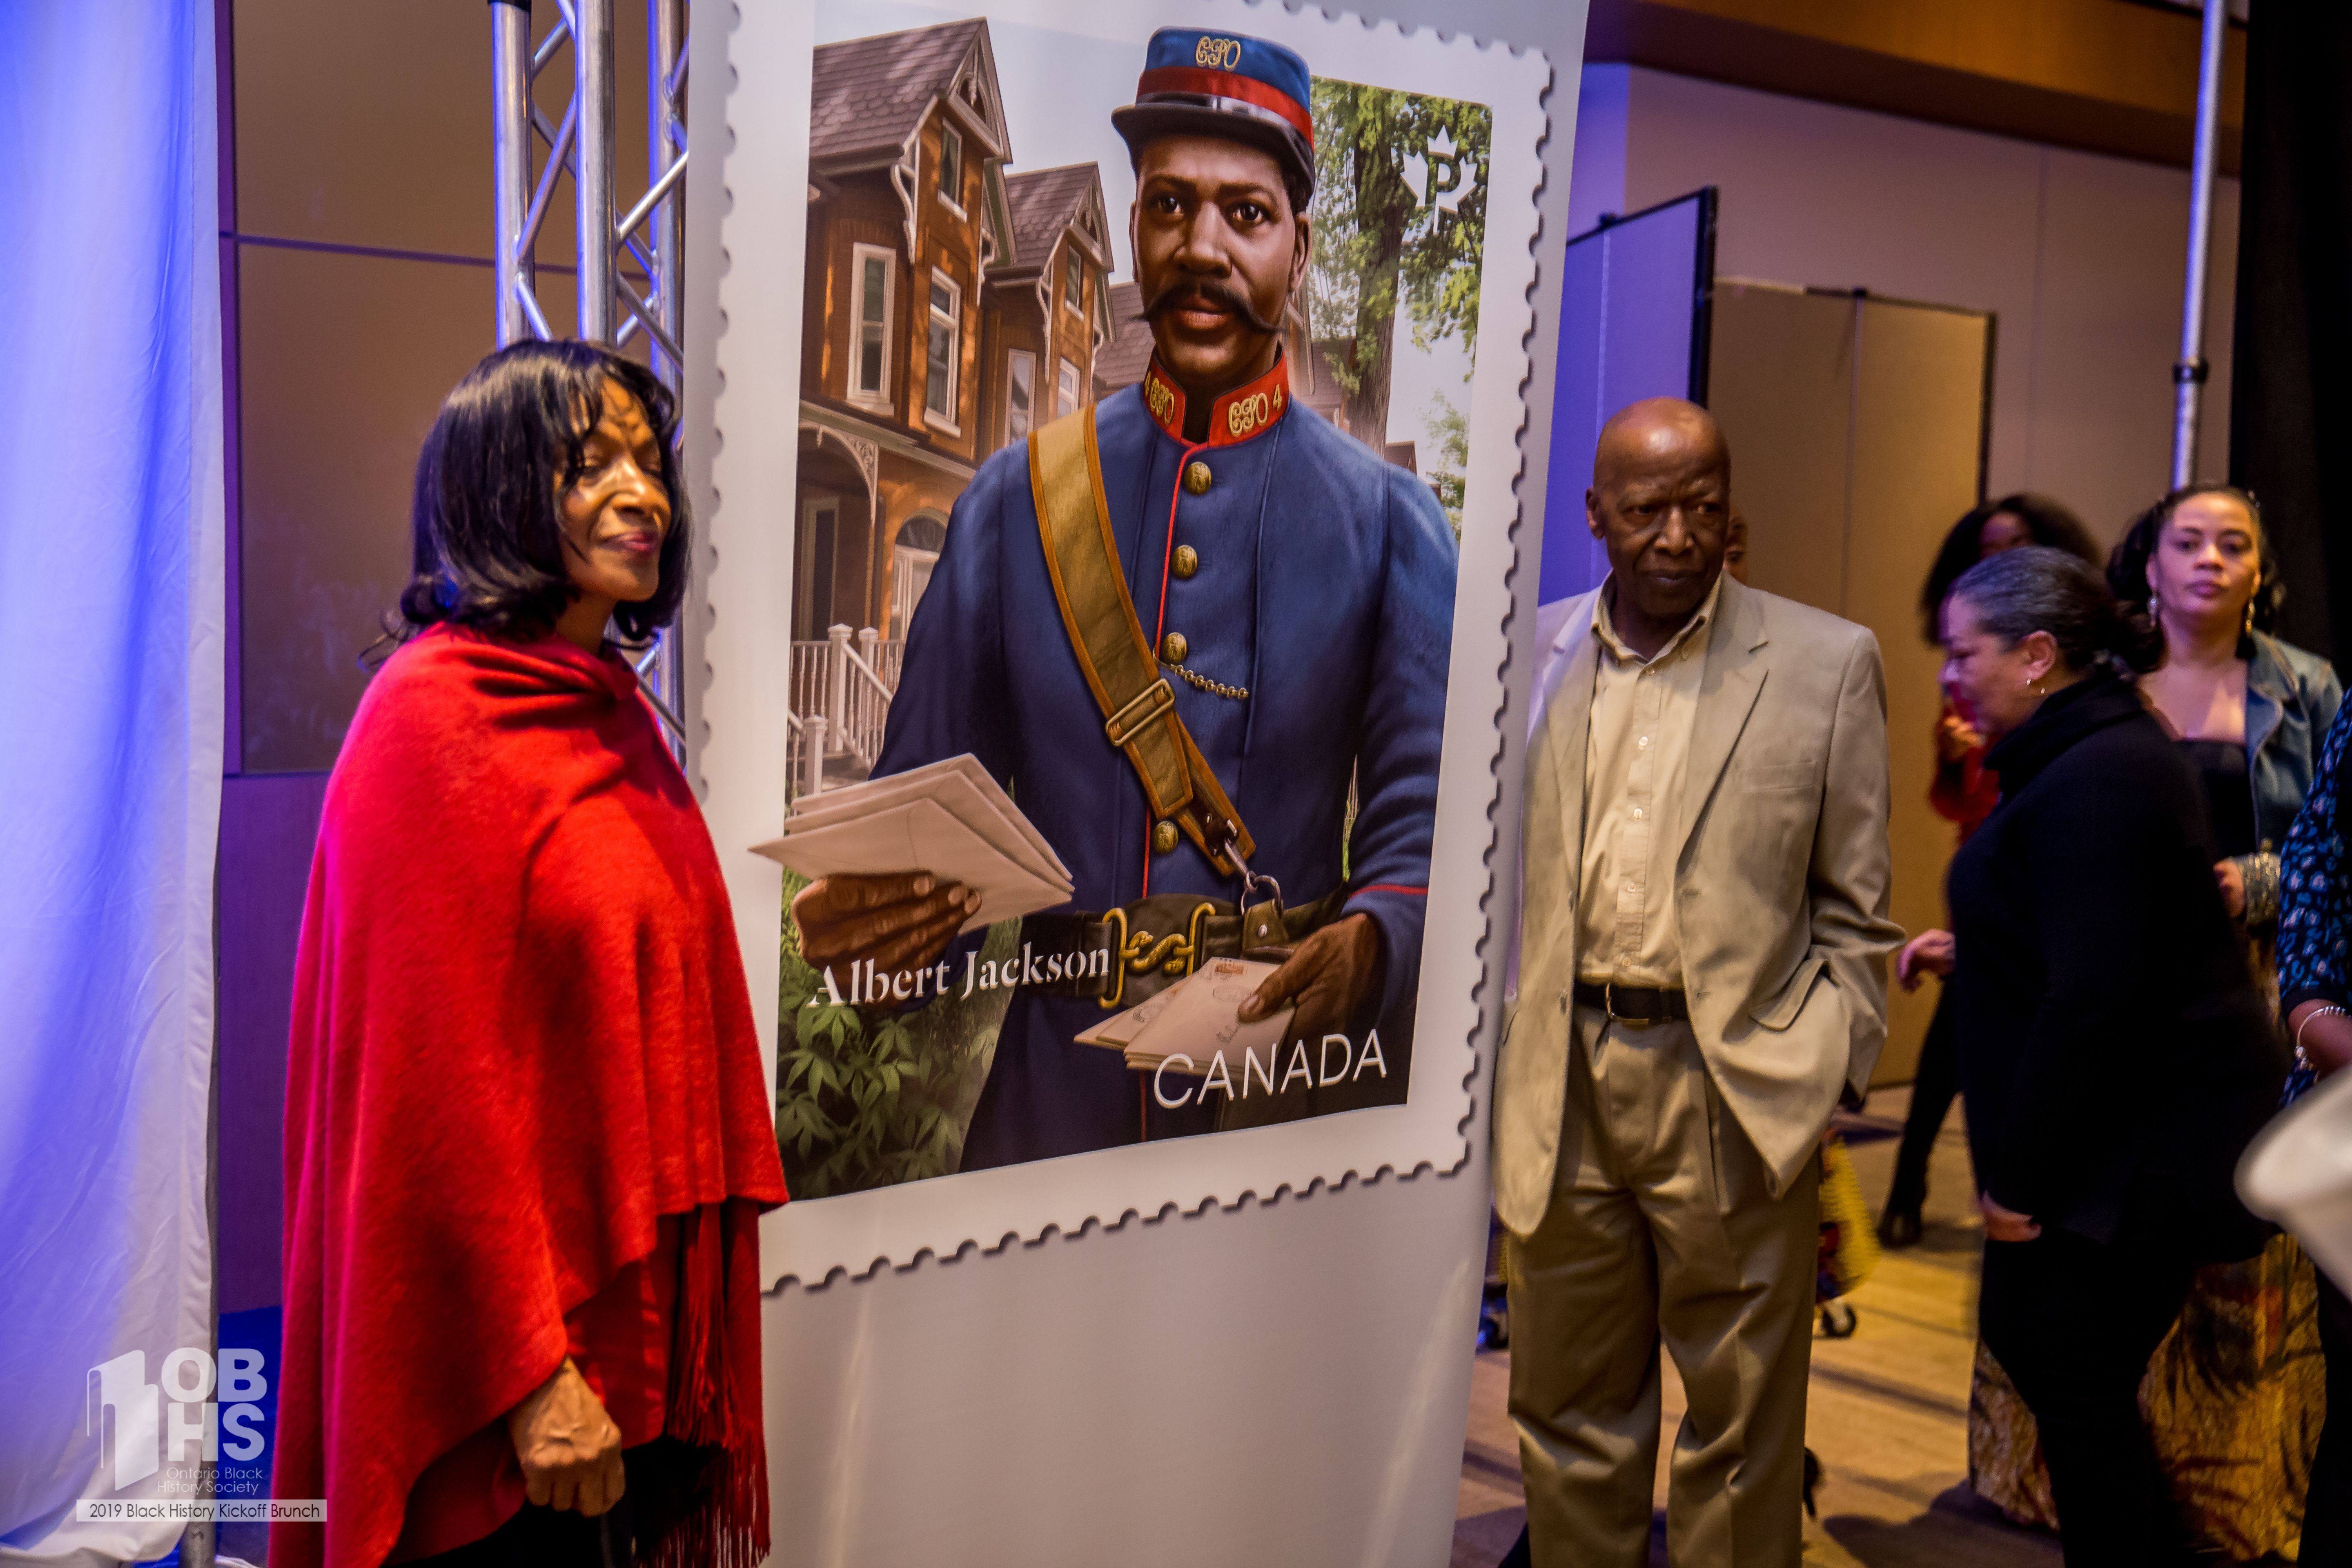 Unveiling the 2019 Canada Post Stamp - Albert Jackson - photo by www.sayhilondon.com